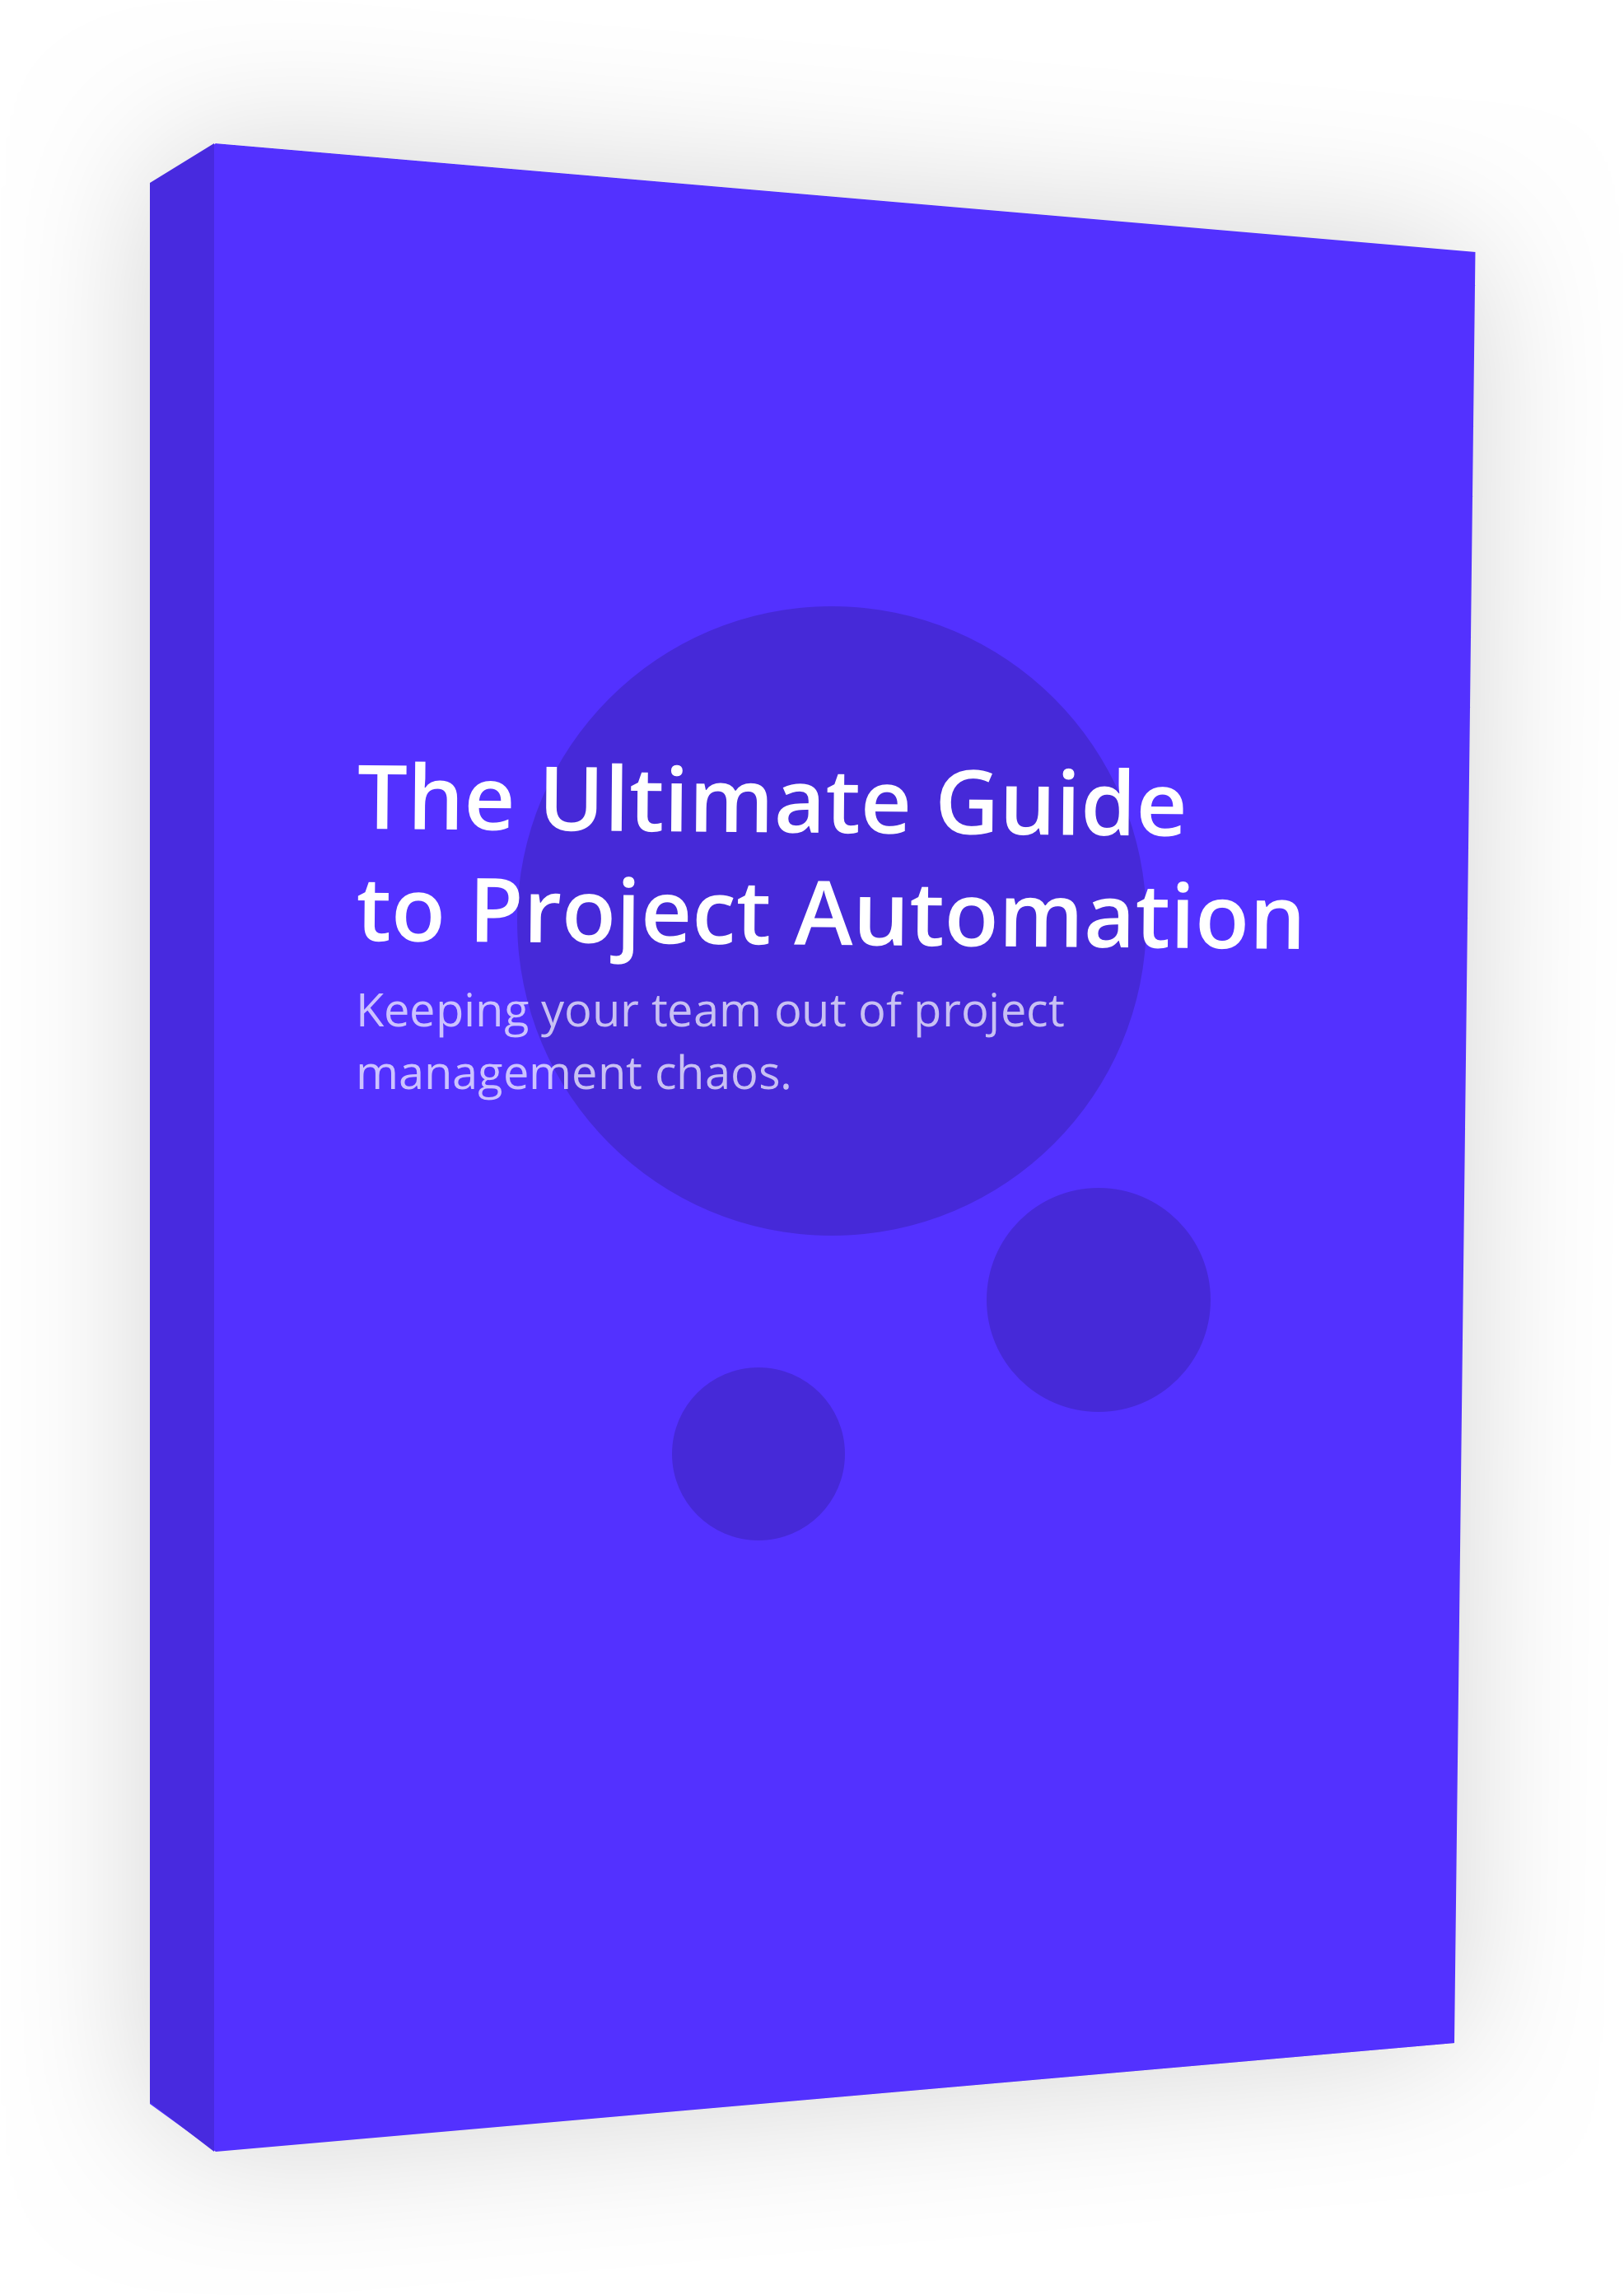 The Ultimate Guide to Project Automation